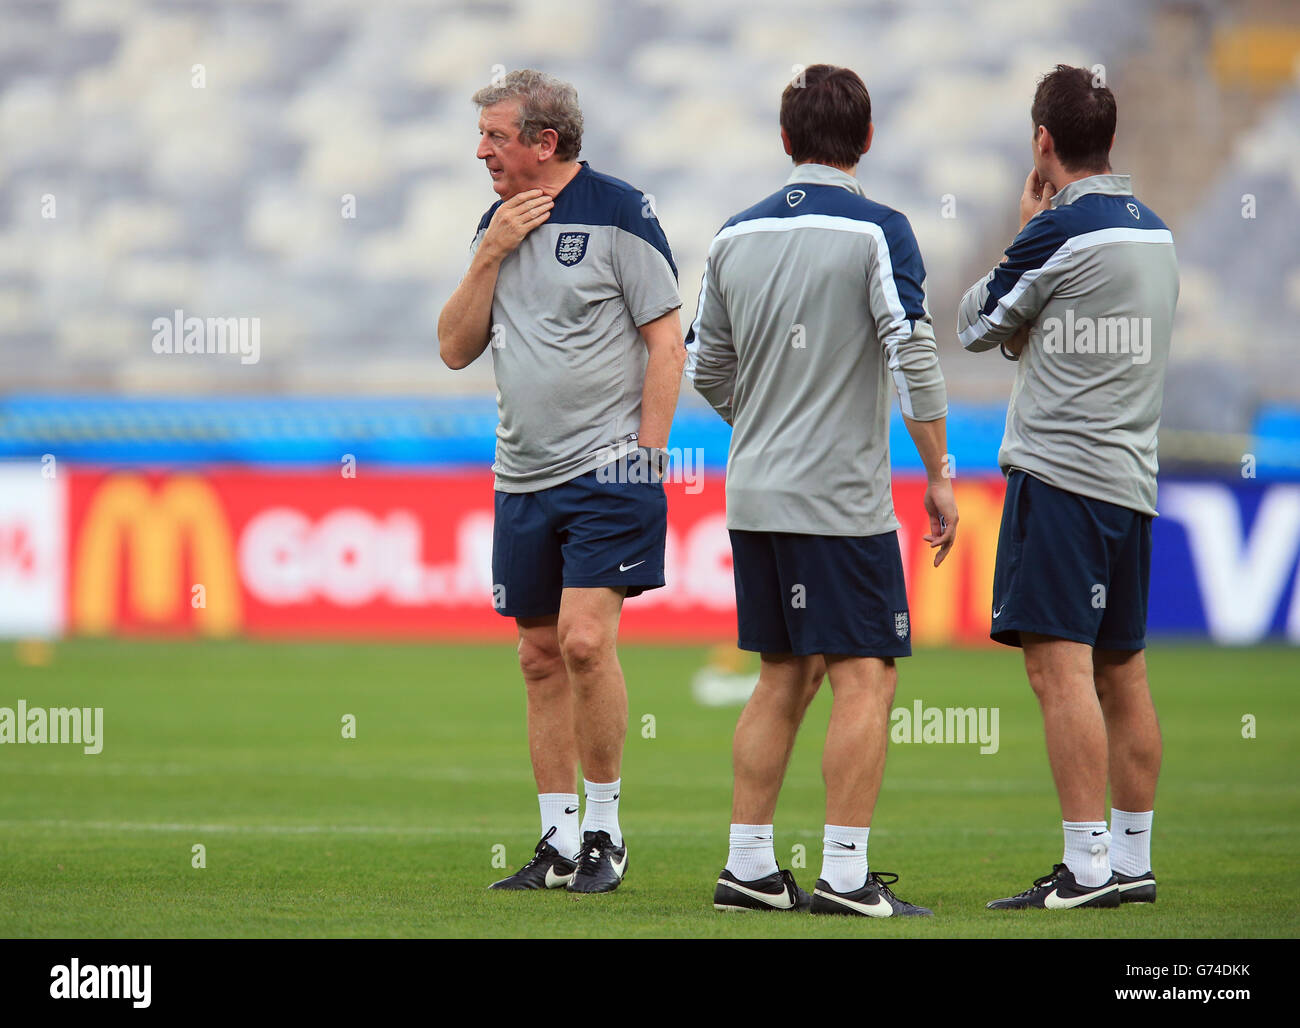 Soccer - FIFA World Cup 2014 - Group D - Costa Rica v England - Day Three - England Training and Press Conference - Estadio M.... England manager Roy Hodgson chats with Gary Neville (center) during a training session at the Estadio Mineirao, Belo Horizonte, Brazil. Stock Photo